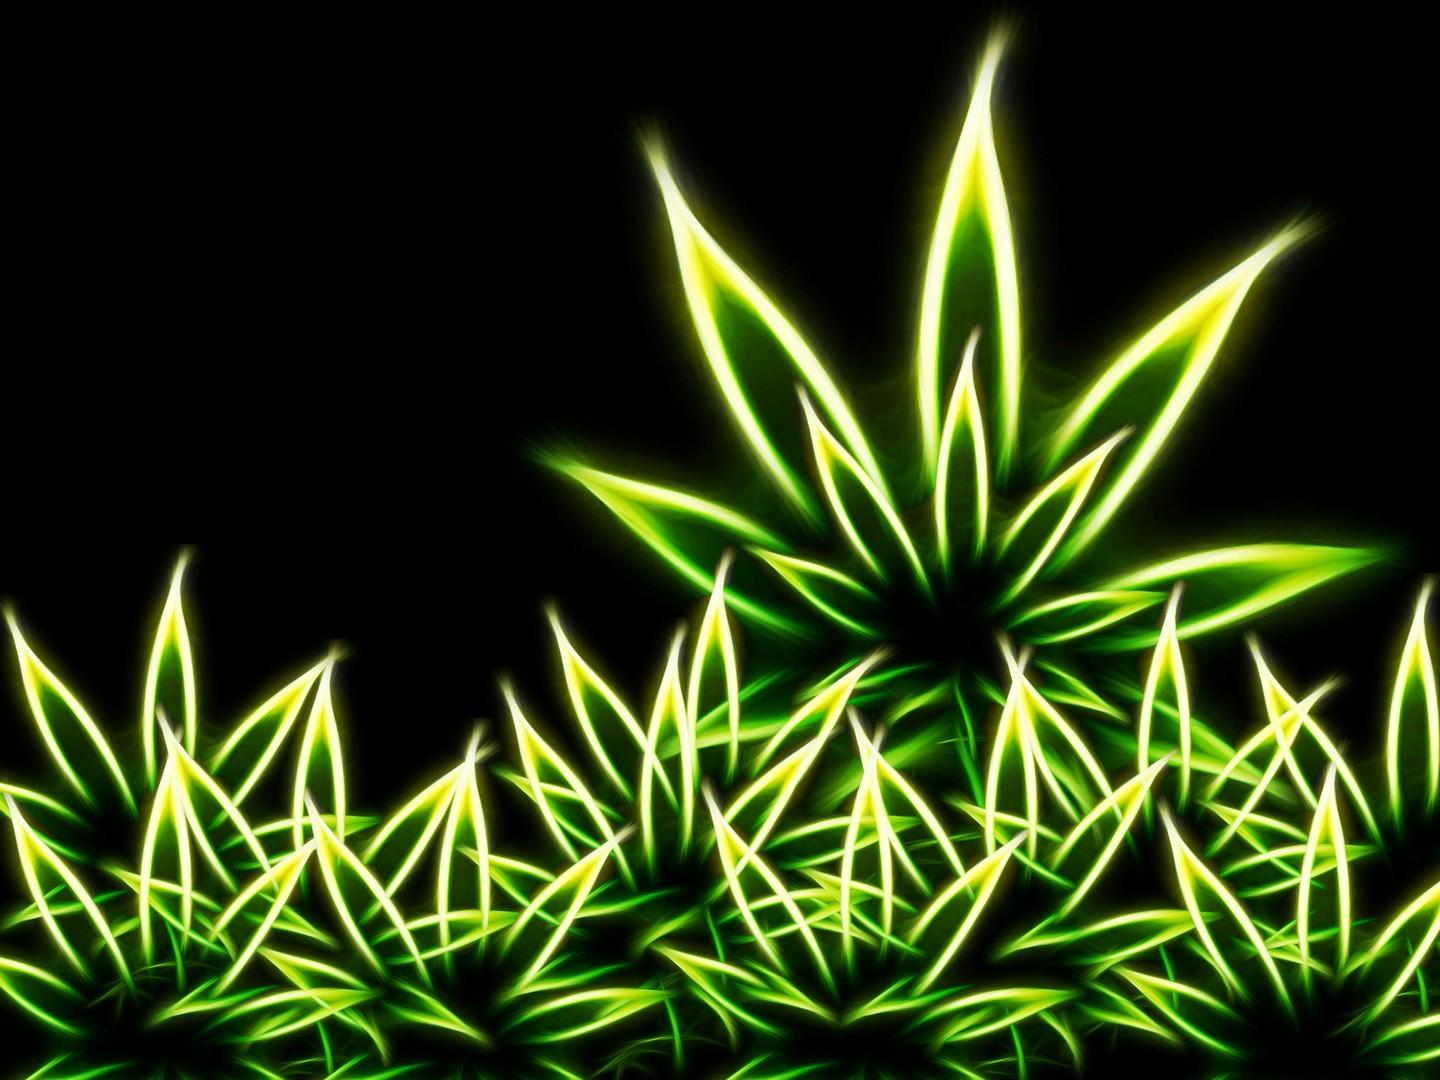 47+] Weed Wallpapers Tumblr